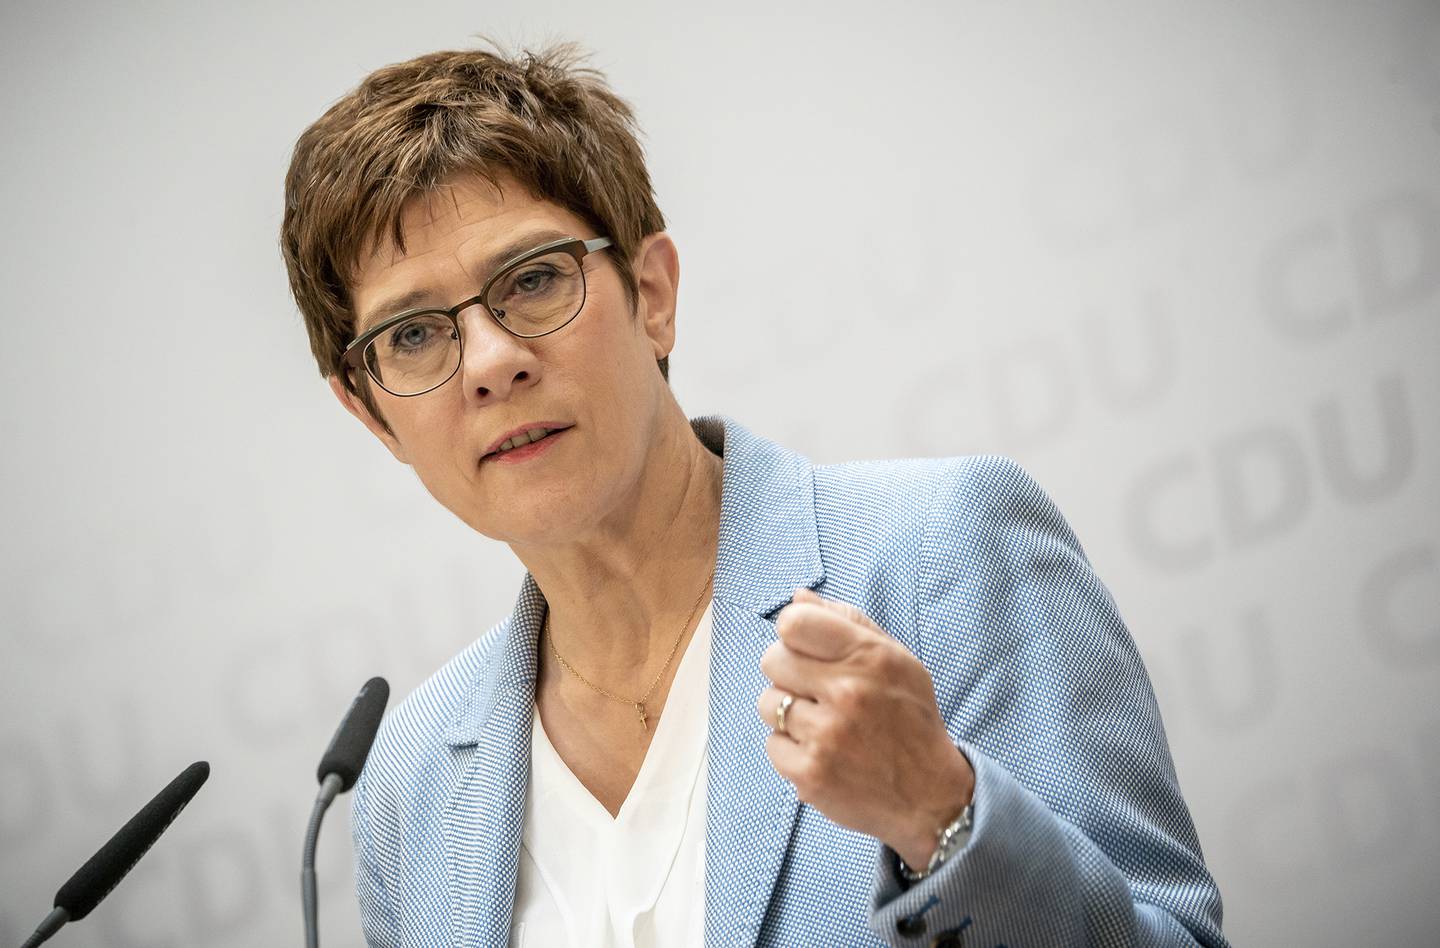 Annegret Kramp-Karrenbauer, Christian Democratic Union, CDU, party chairwoman and German minister of defense, speaks at a news conference  following a CDU leaders meeting at the headquarters in Berlin